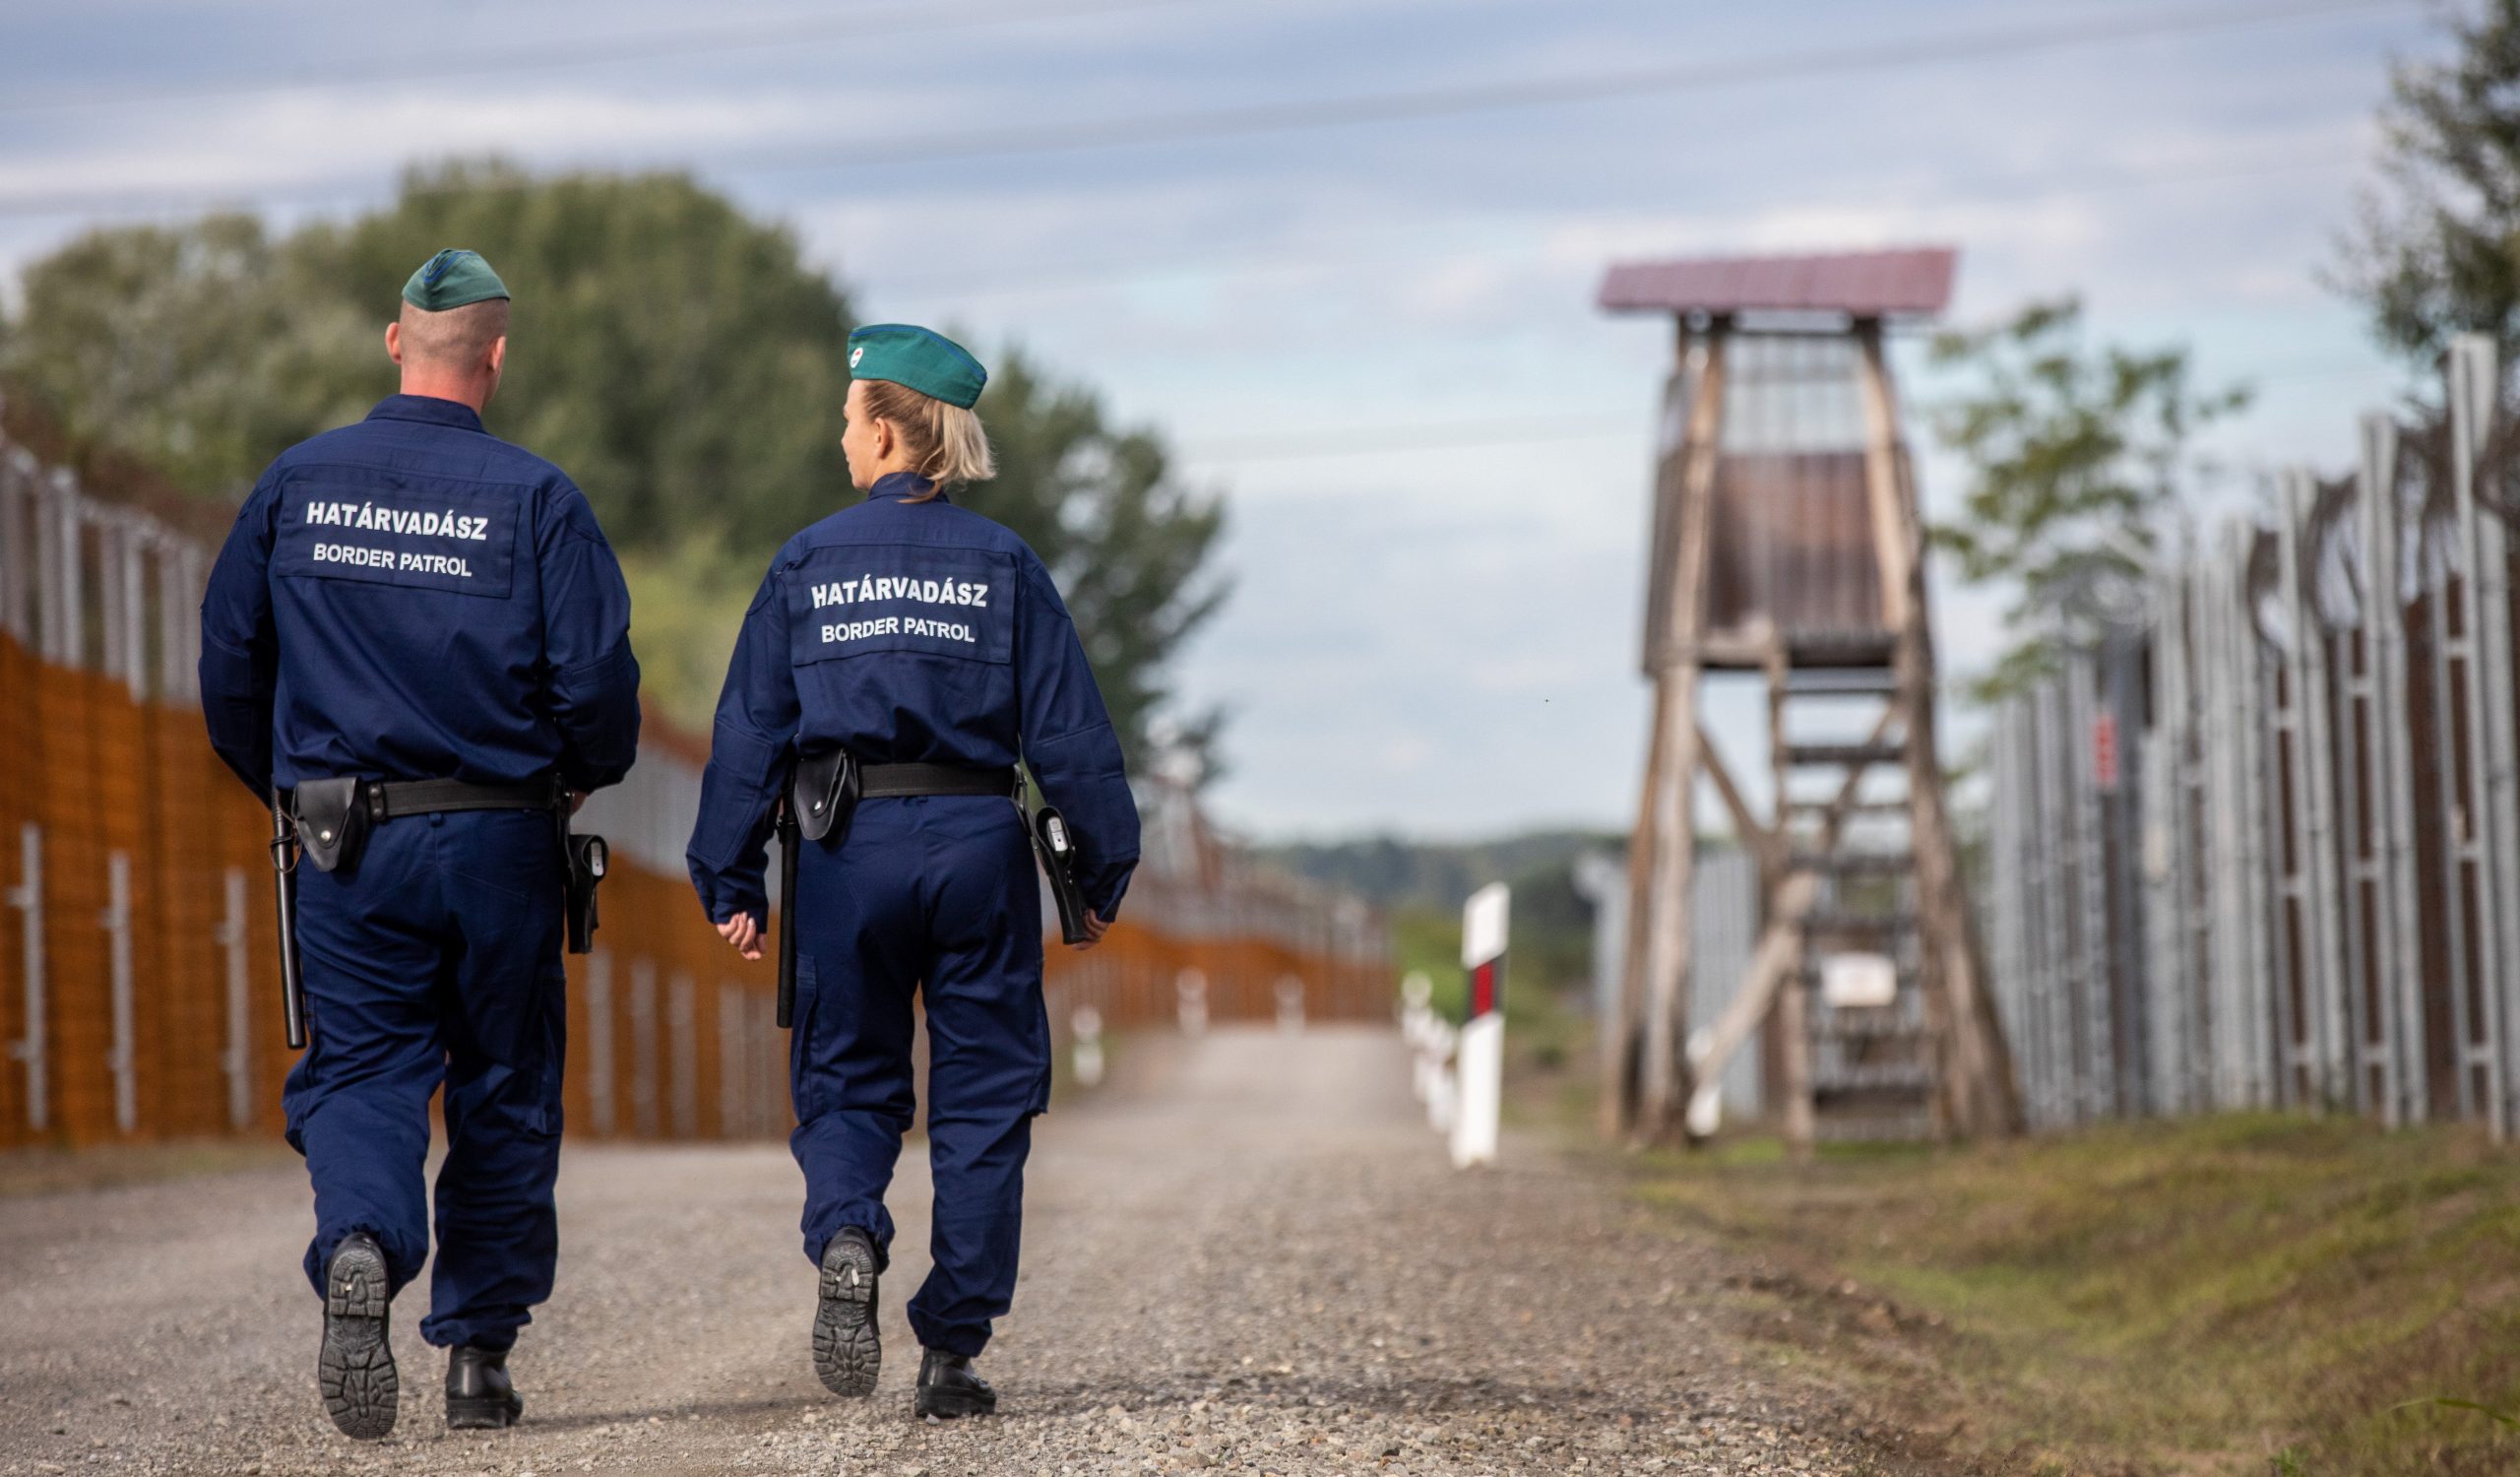 Slovakia to Strengthen Border-protection Cooperation with Hungary